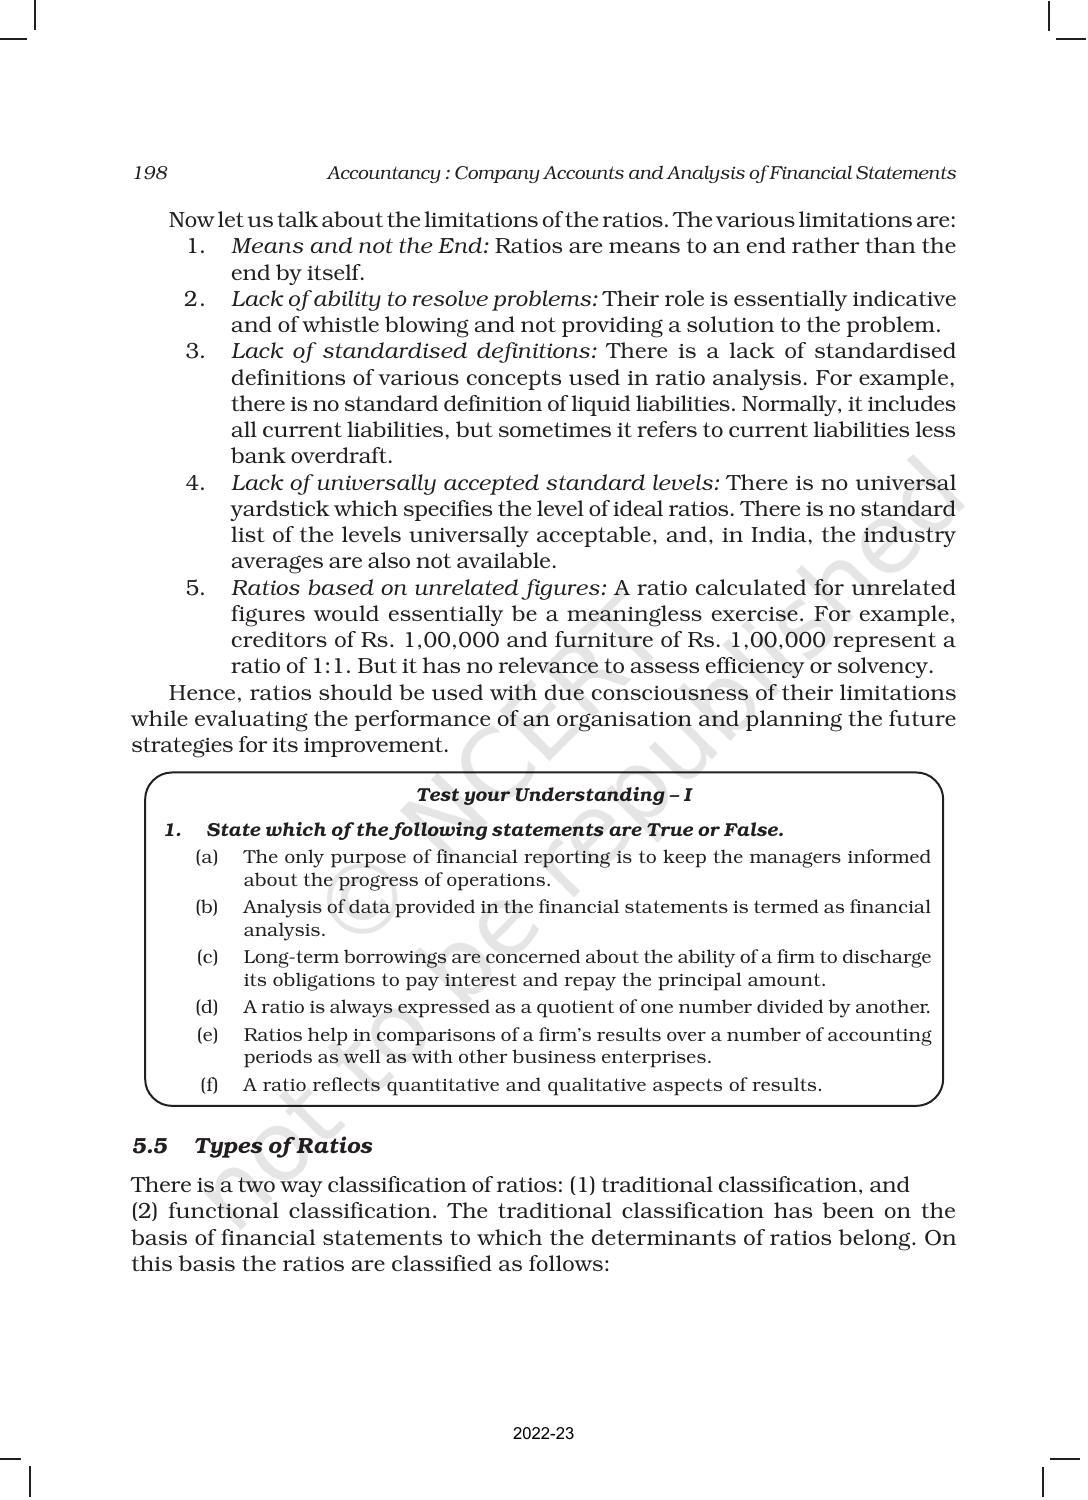 NCERT Book for Class 12 Accountancy Part II Chapter 5 Accounting Ratios - Page 5